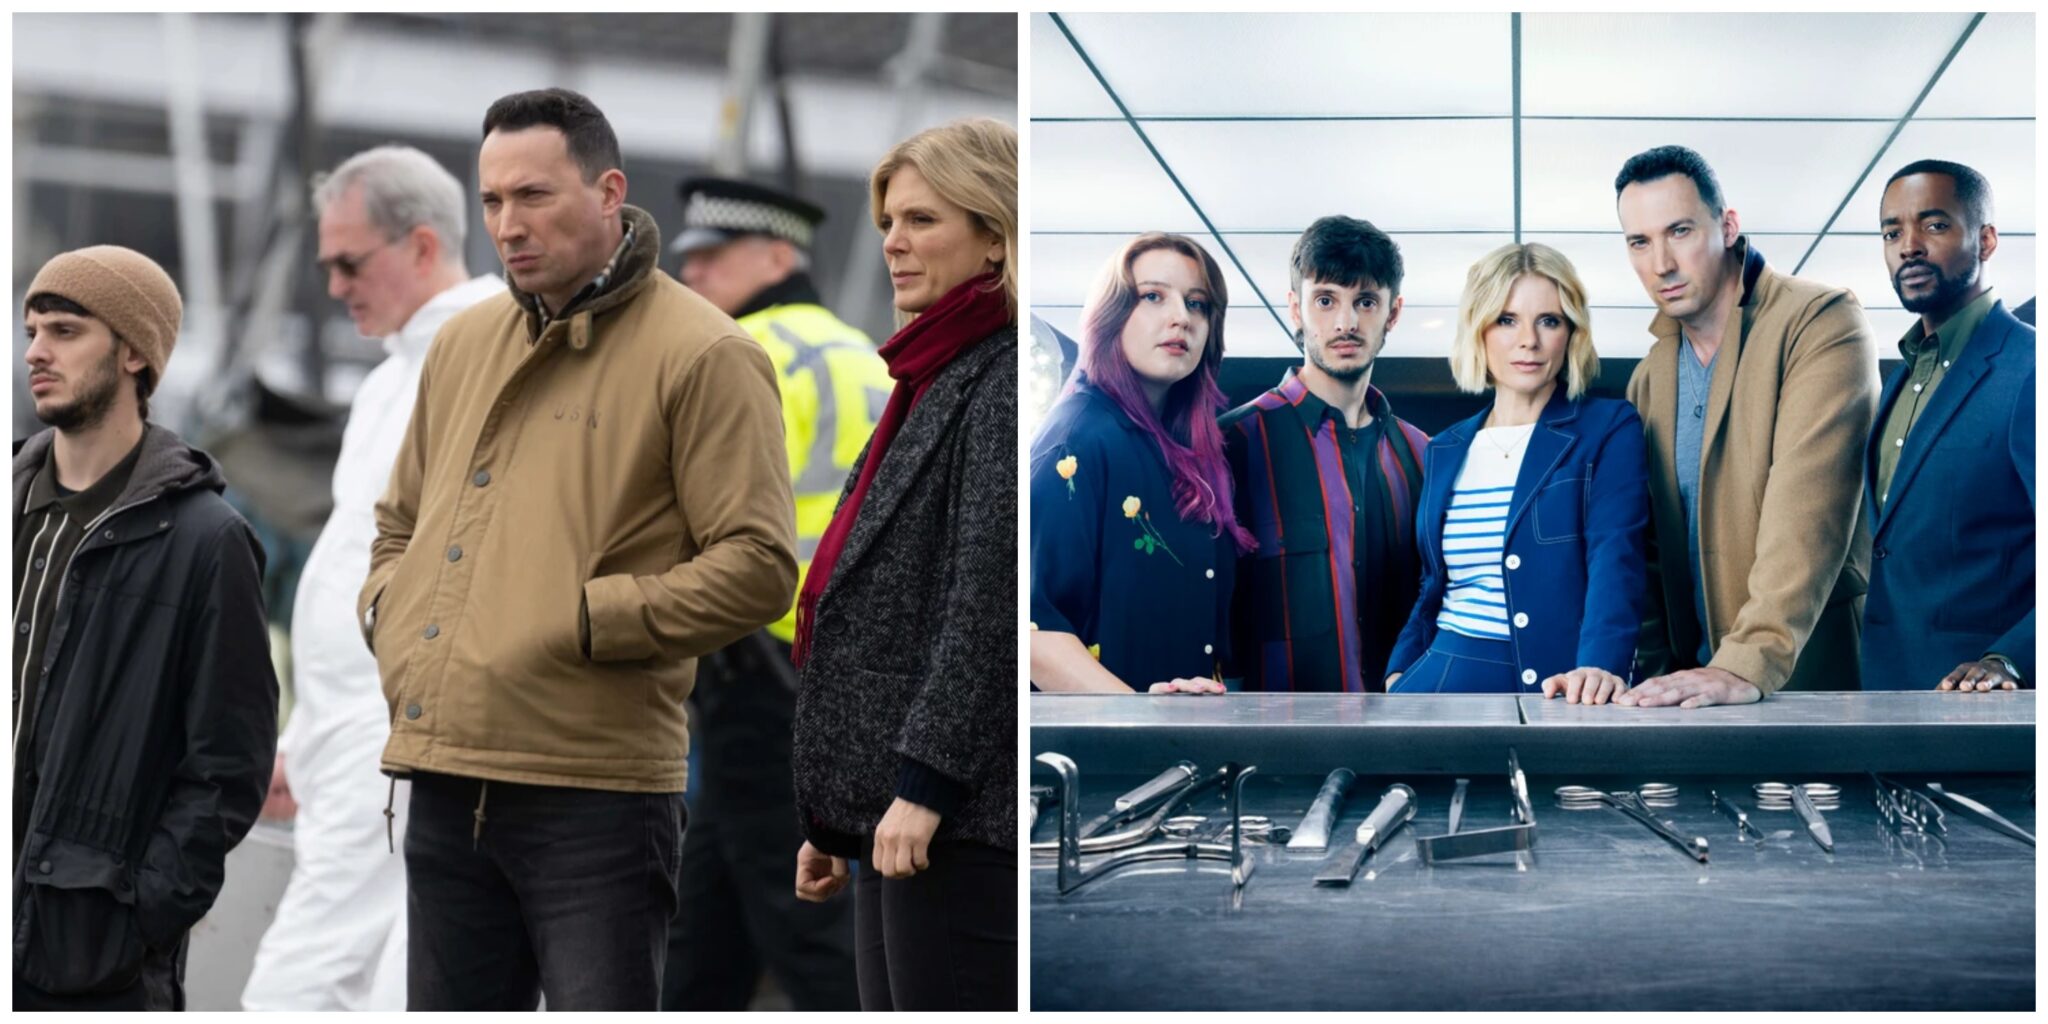 Silent Witness Season 27 Filming Locations When will the latest season